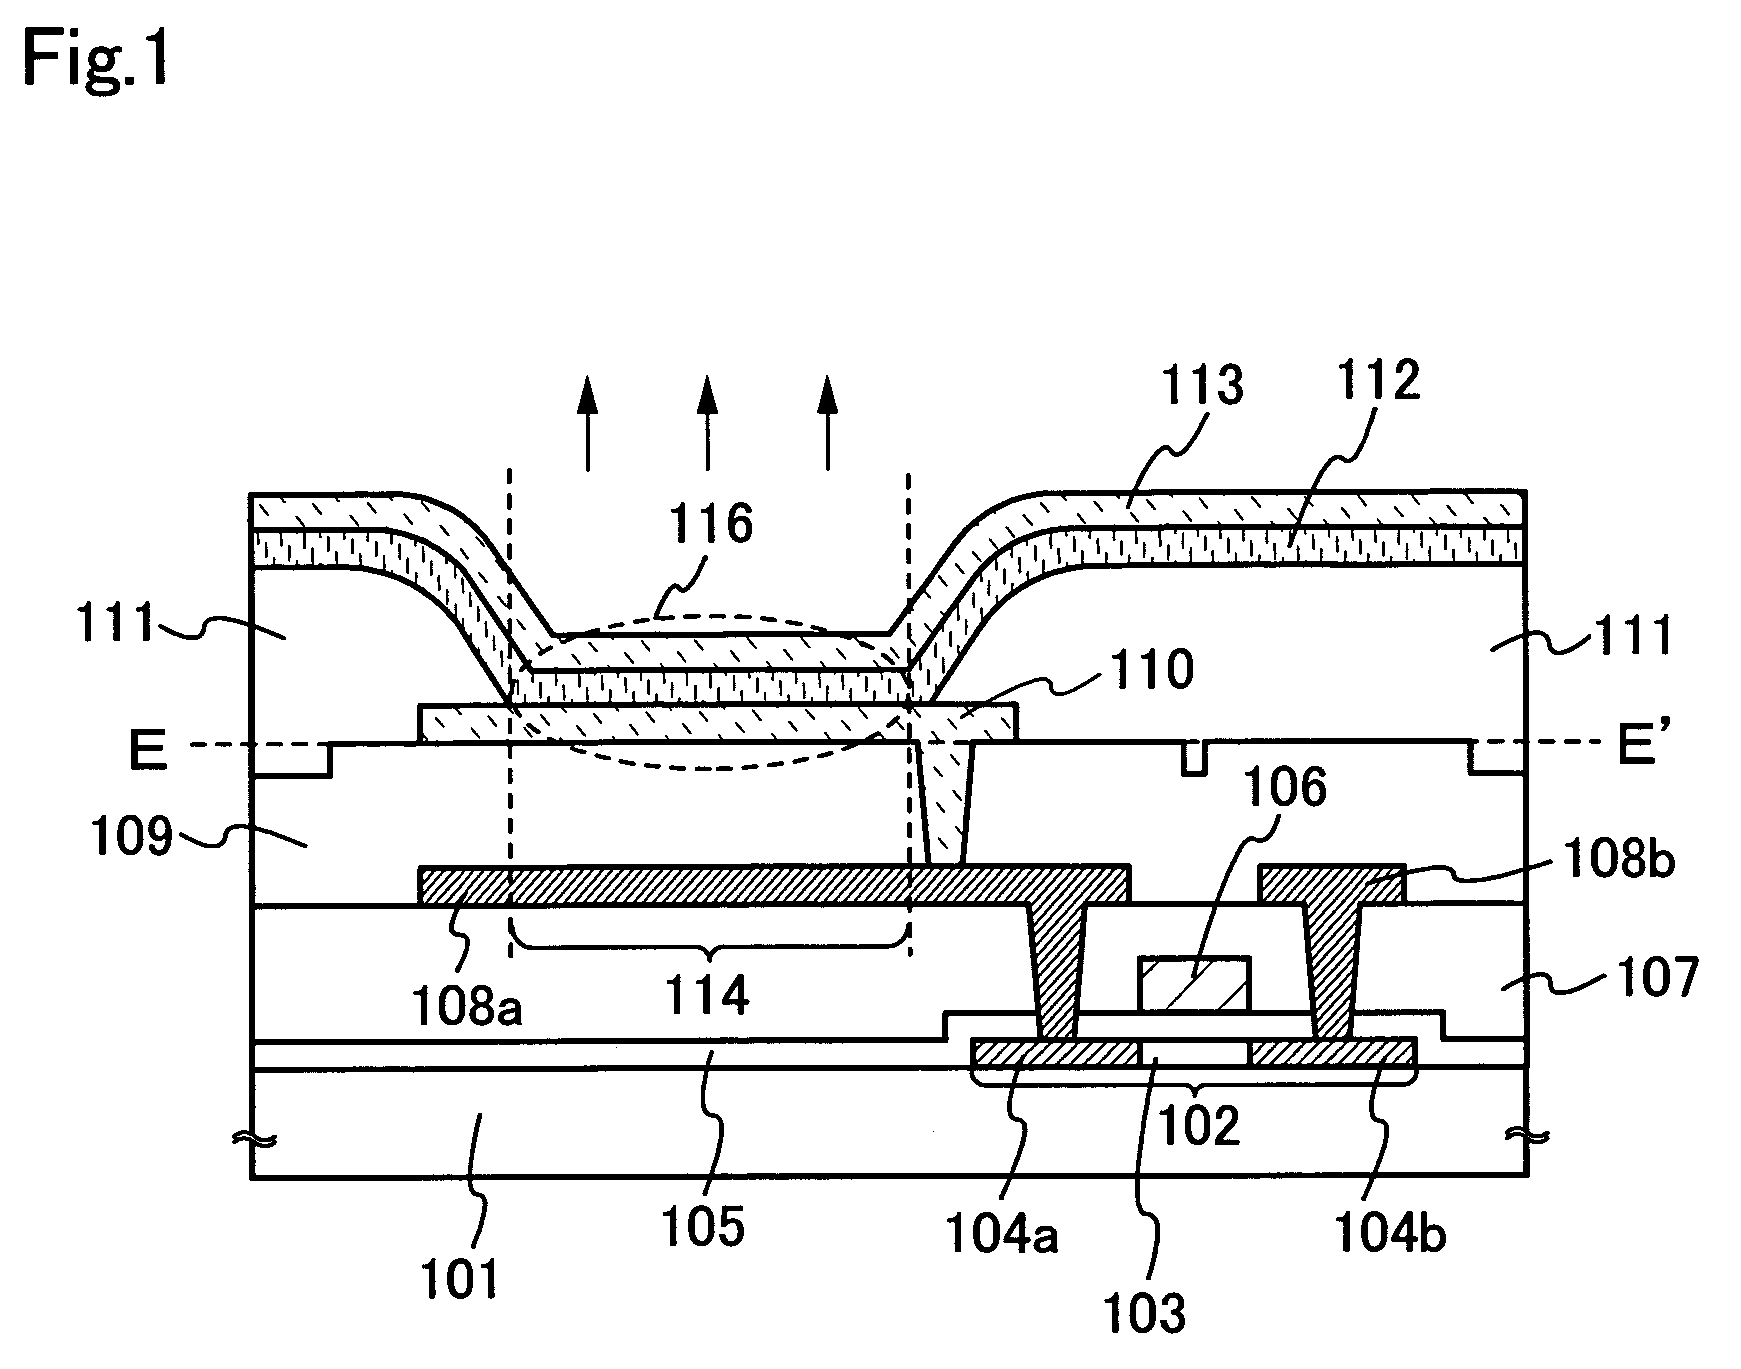 Light emitting structure including an exposed electrode overlapping a wiring or conductive layer